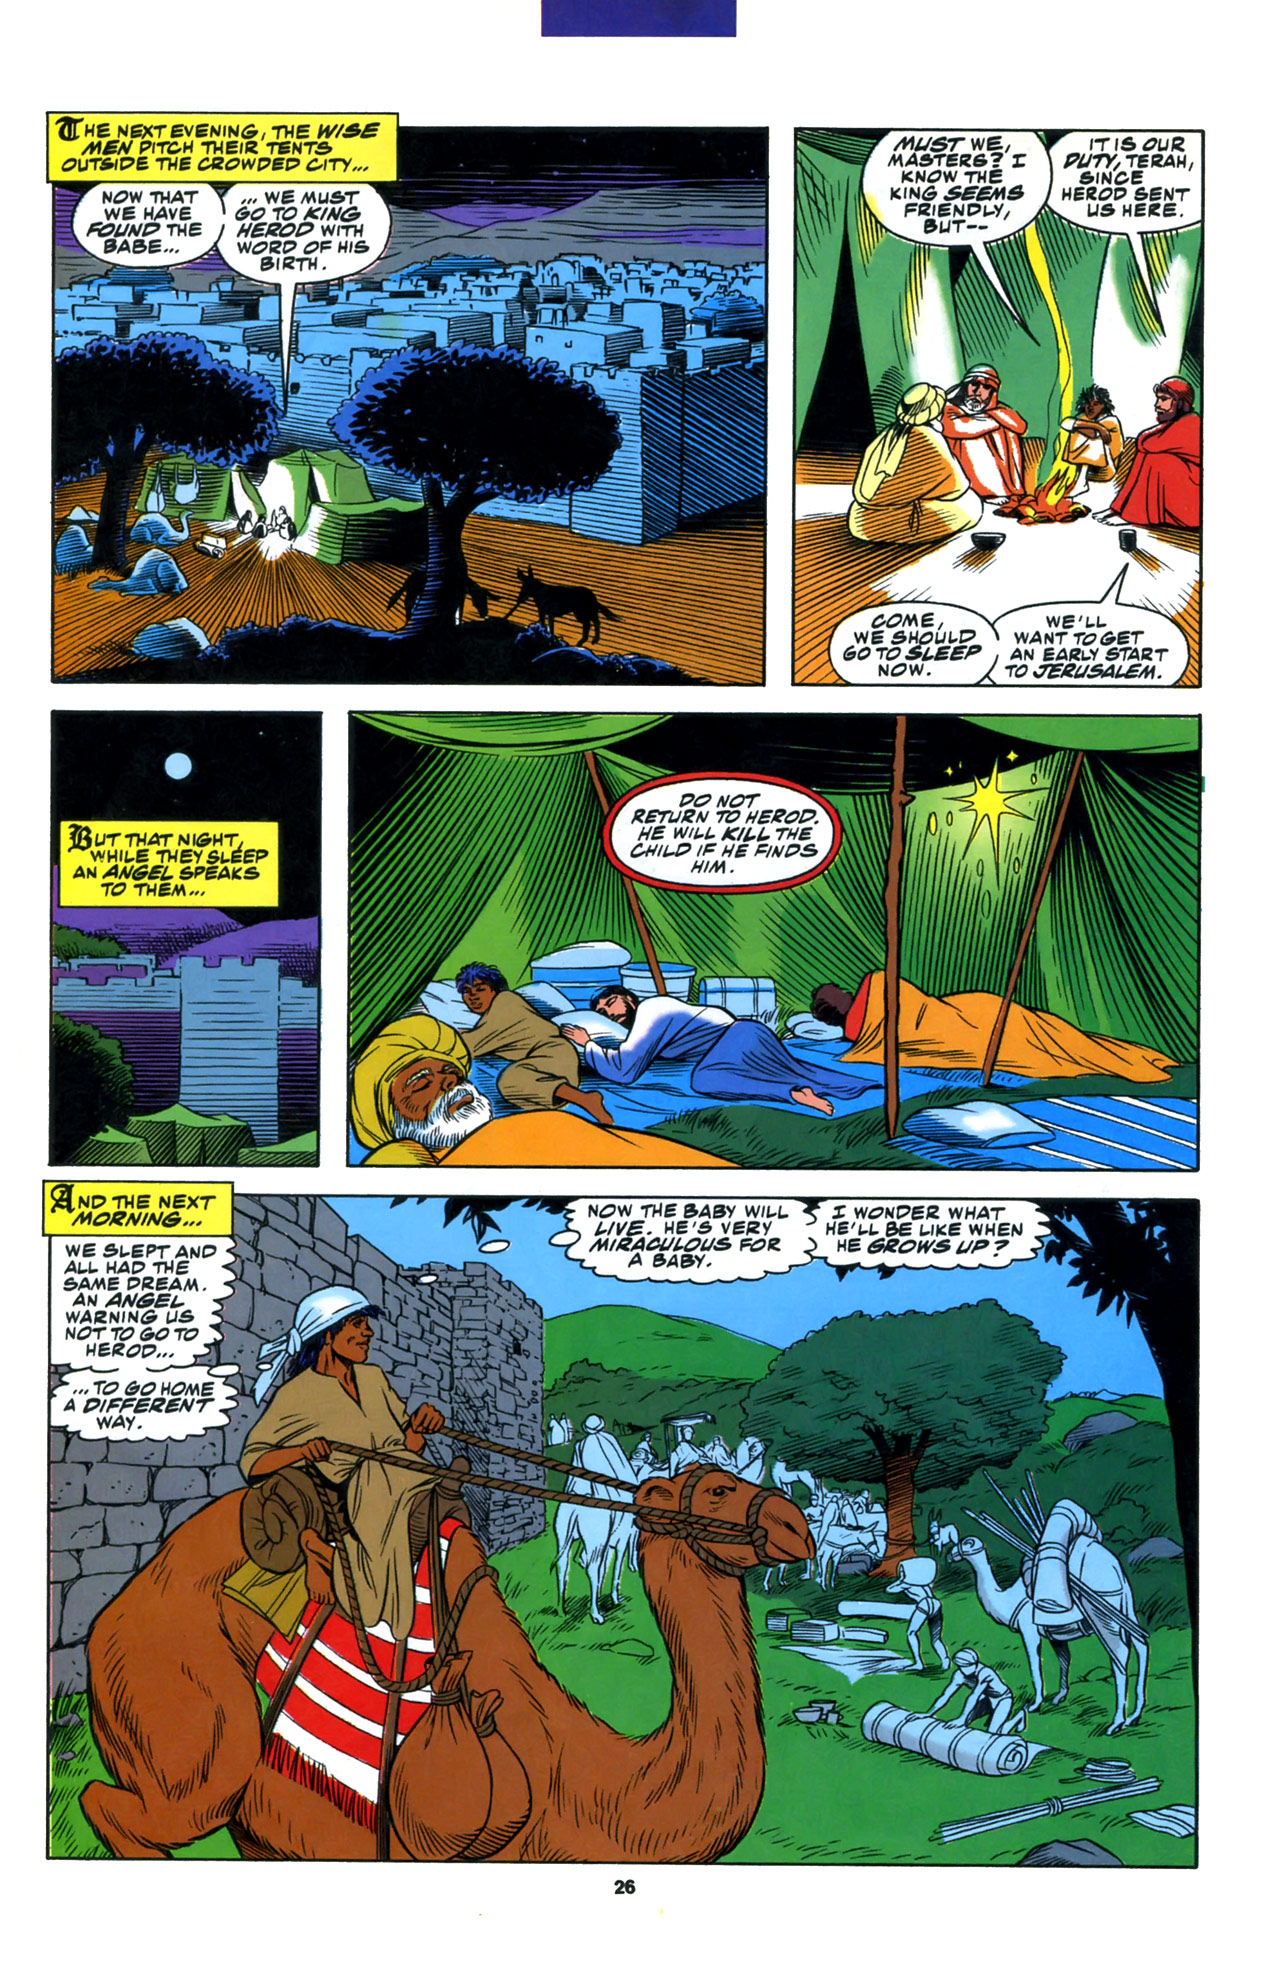 Read online The Life of Christ comic -  Issue # Full - 27